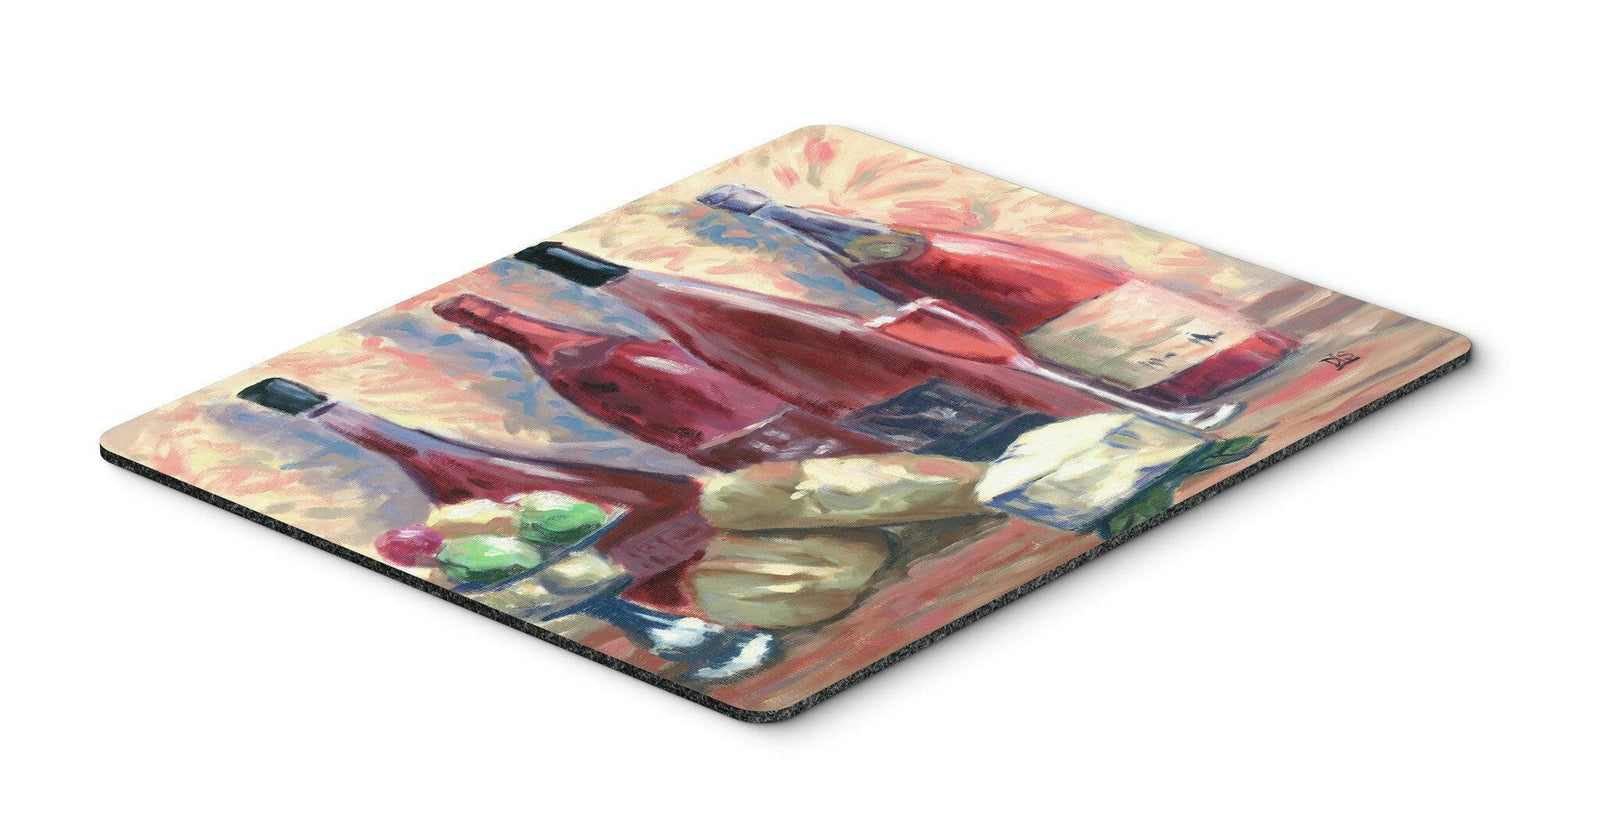 Wine and Cheese by David Smith Mouse Pad, Hot Pad or Trivet SDSM0127MP by Caroline's Treasures